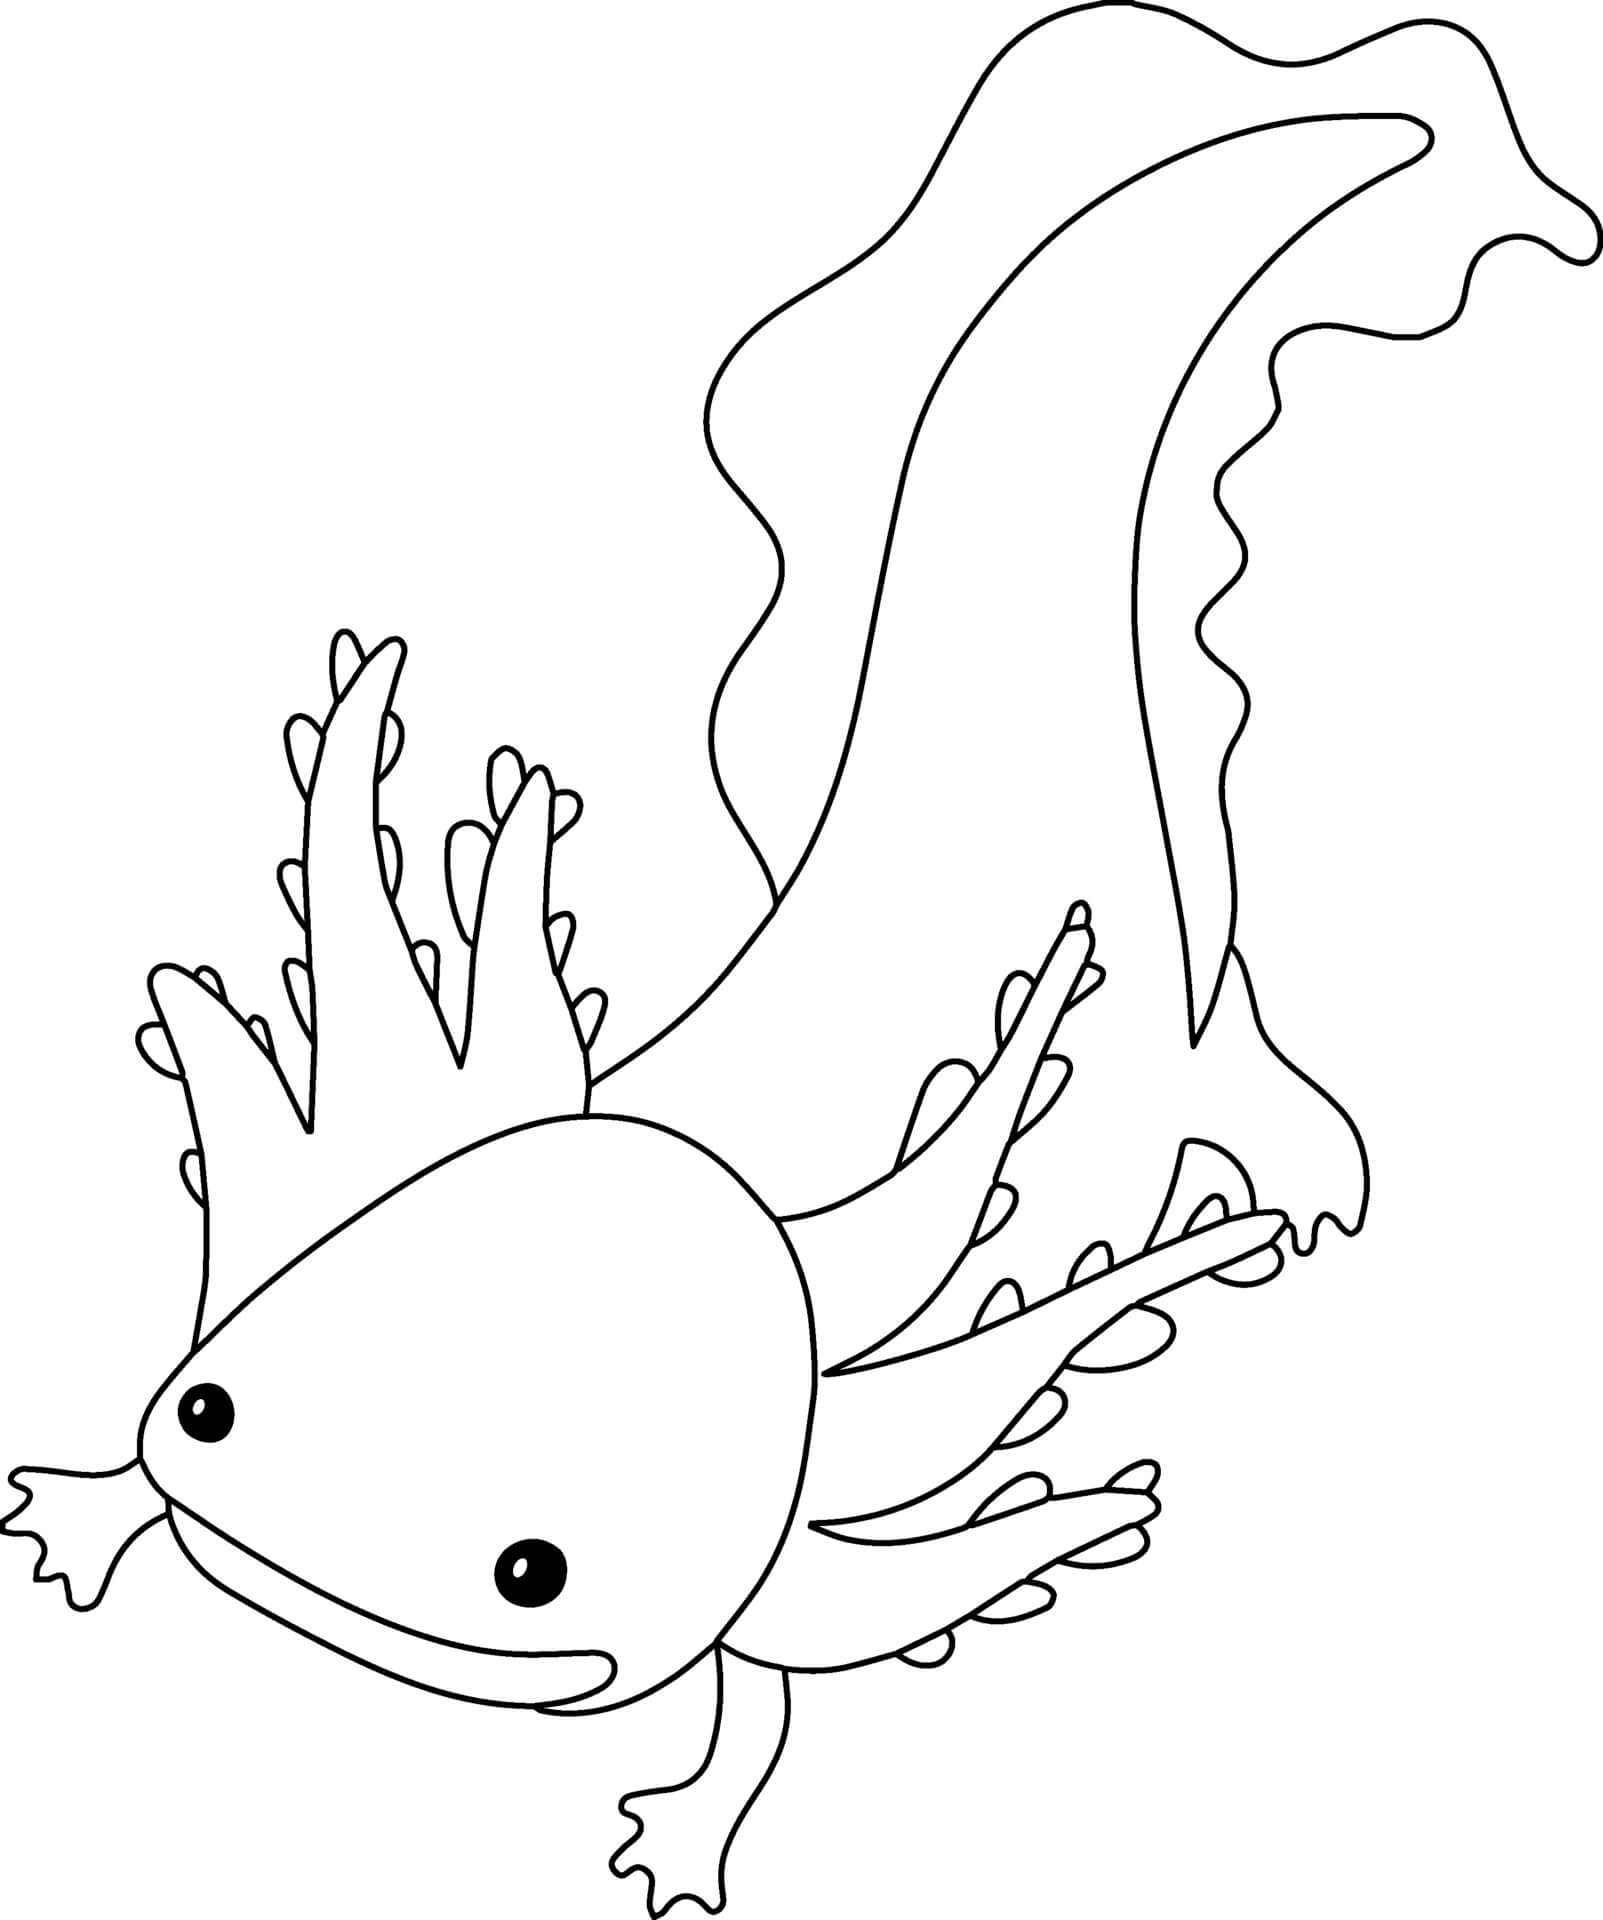 Axolotl Coloring Pages   Coloring Cool